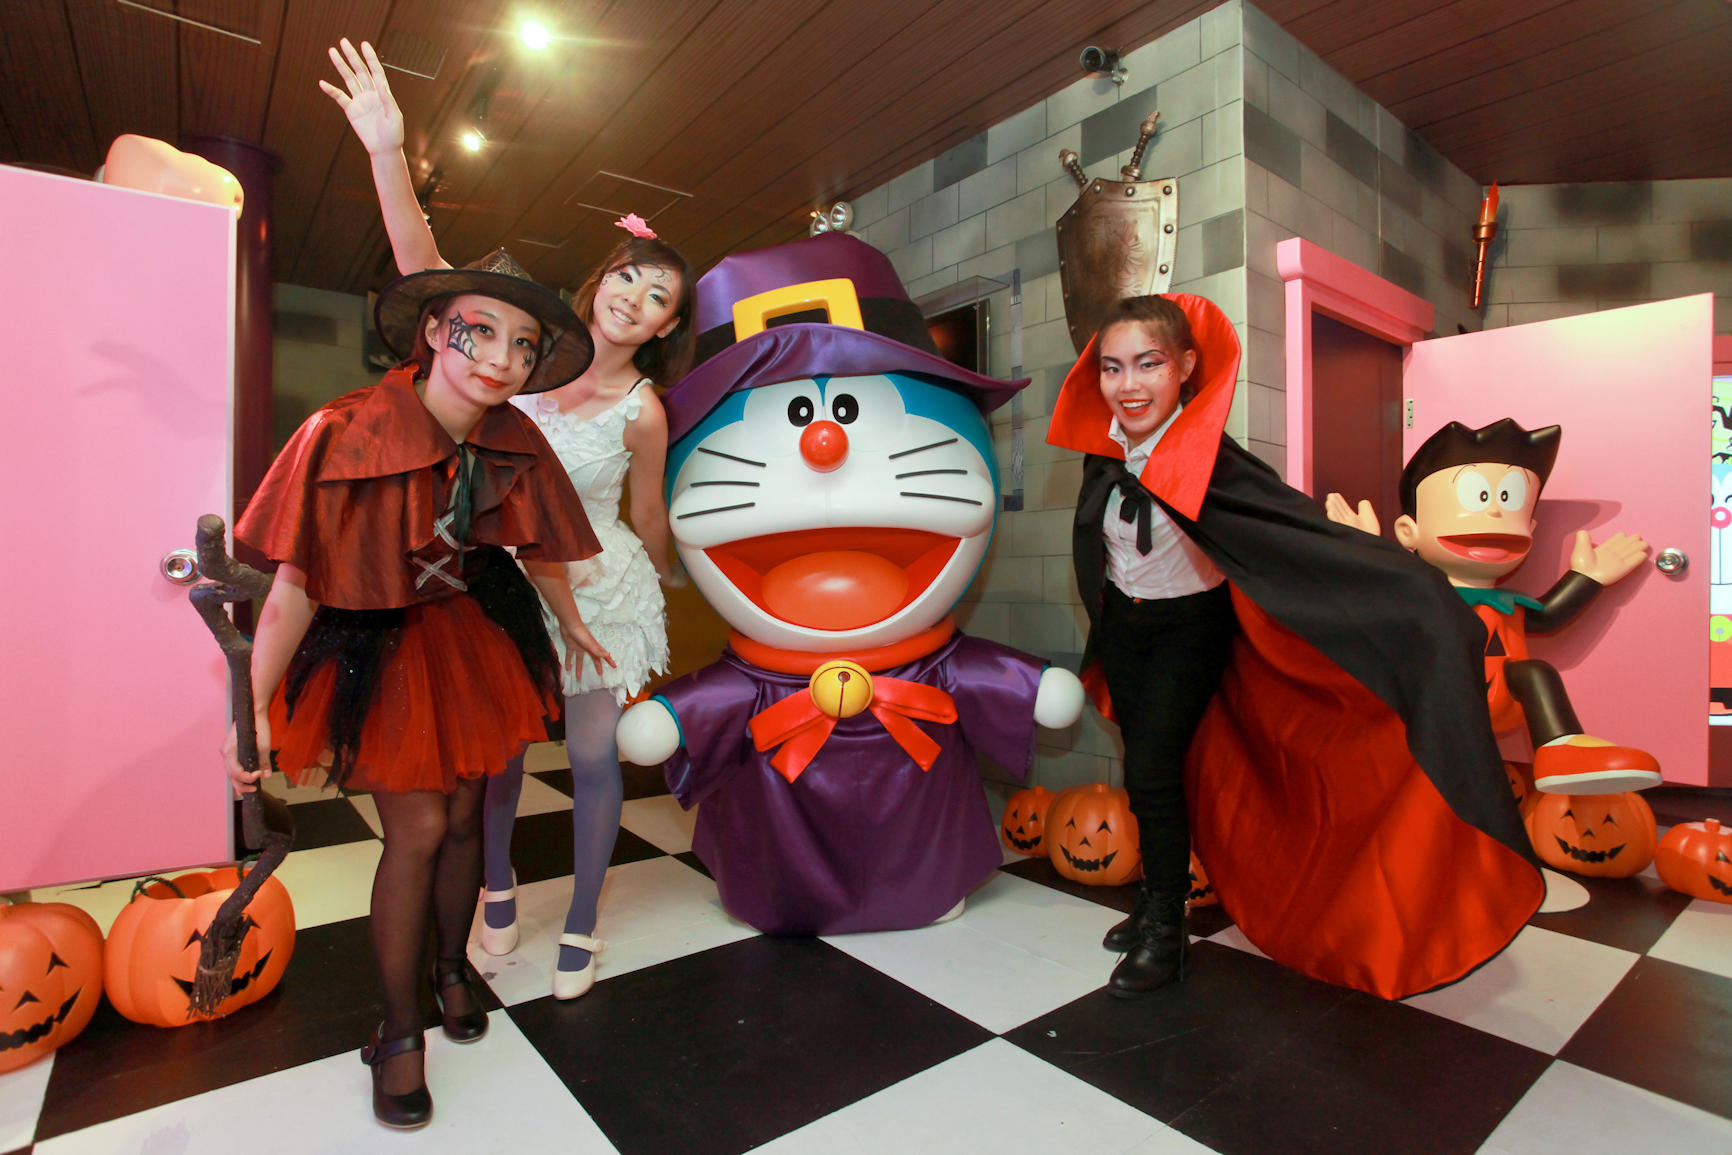 Halloween characters at the Doraemon attraction.